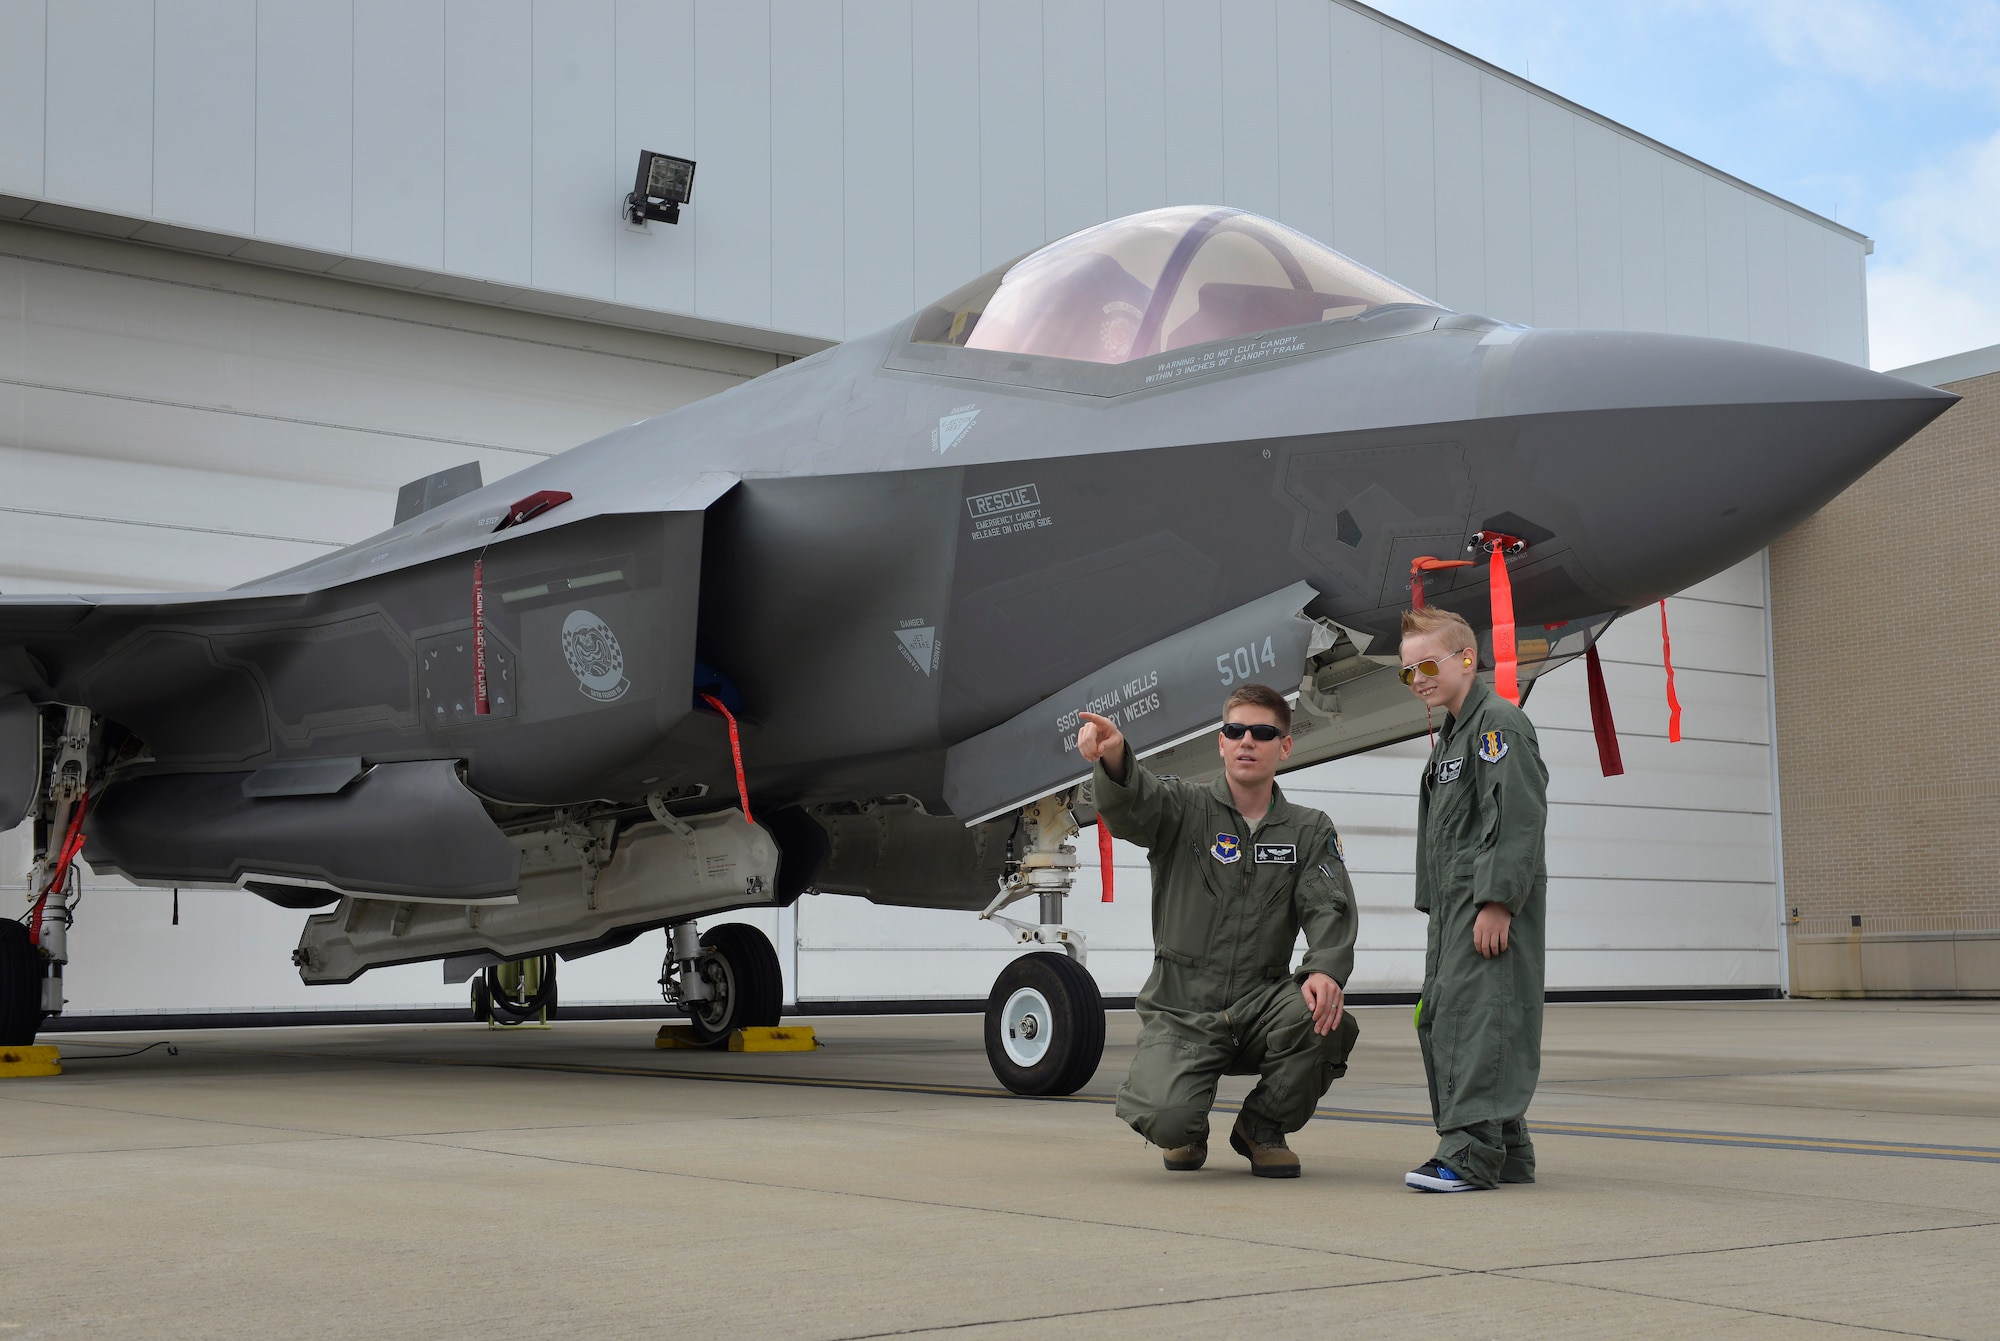 Maj. Mike Krestyn, 33rd Operations Support Squadron chief of scheduling, talks with Pilot for a Day, Christian Loafman, about the F-35A Lightning II at Eglin Air Force Base, Fla., May 18, 2016. The Pilot for a Day program is a new initiative for the 33rd Fighter Wing that gives children the opportunity to experience what it’s like to be an F-35A pilot. (U.S. Air Force photo/Senior Airman Andrea Posey)